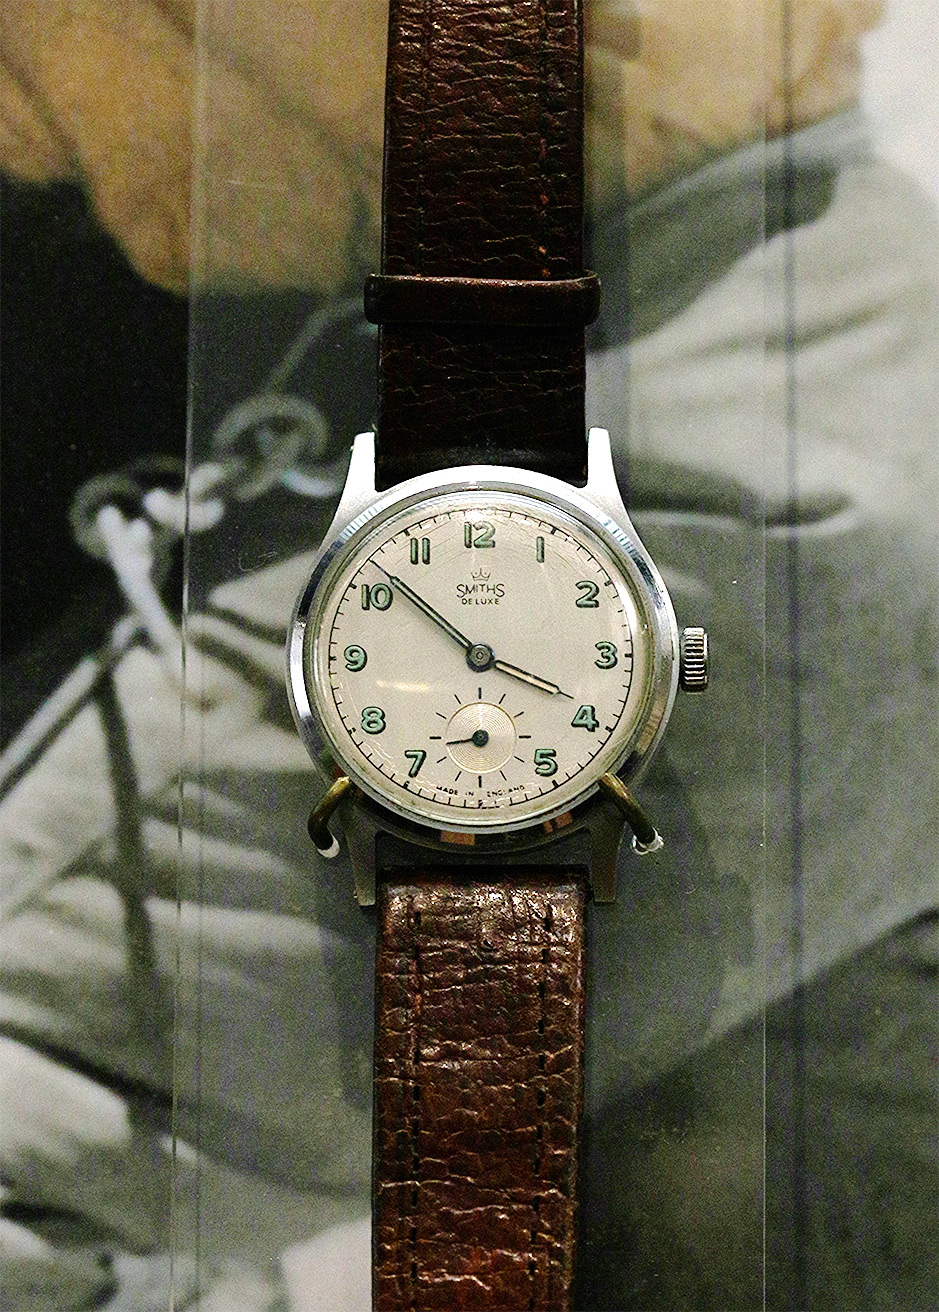 "Presented to the Clockmakers Museum around October 1953 by Sir Edmund Hillary, after wearing it on his ascent up the mountain. The watch is a Smiths De Luxe 15 jewel movement in a steel waterproof case by the Dennison Watch Case Company. It was originally oiled with a special lubricant to withstand low temperatures- on his return Hillary had reported to Smiths that he had been very satisfied with the watch. The watch is on display in the Clockmakers Museum at the Science Museum London" - Anna Rolls, Curator of the Clockmakers' Museum, in an email to The Outdoor Journal.